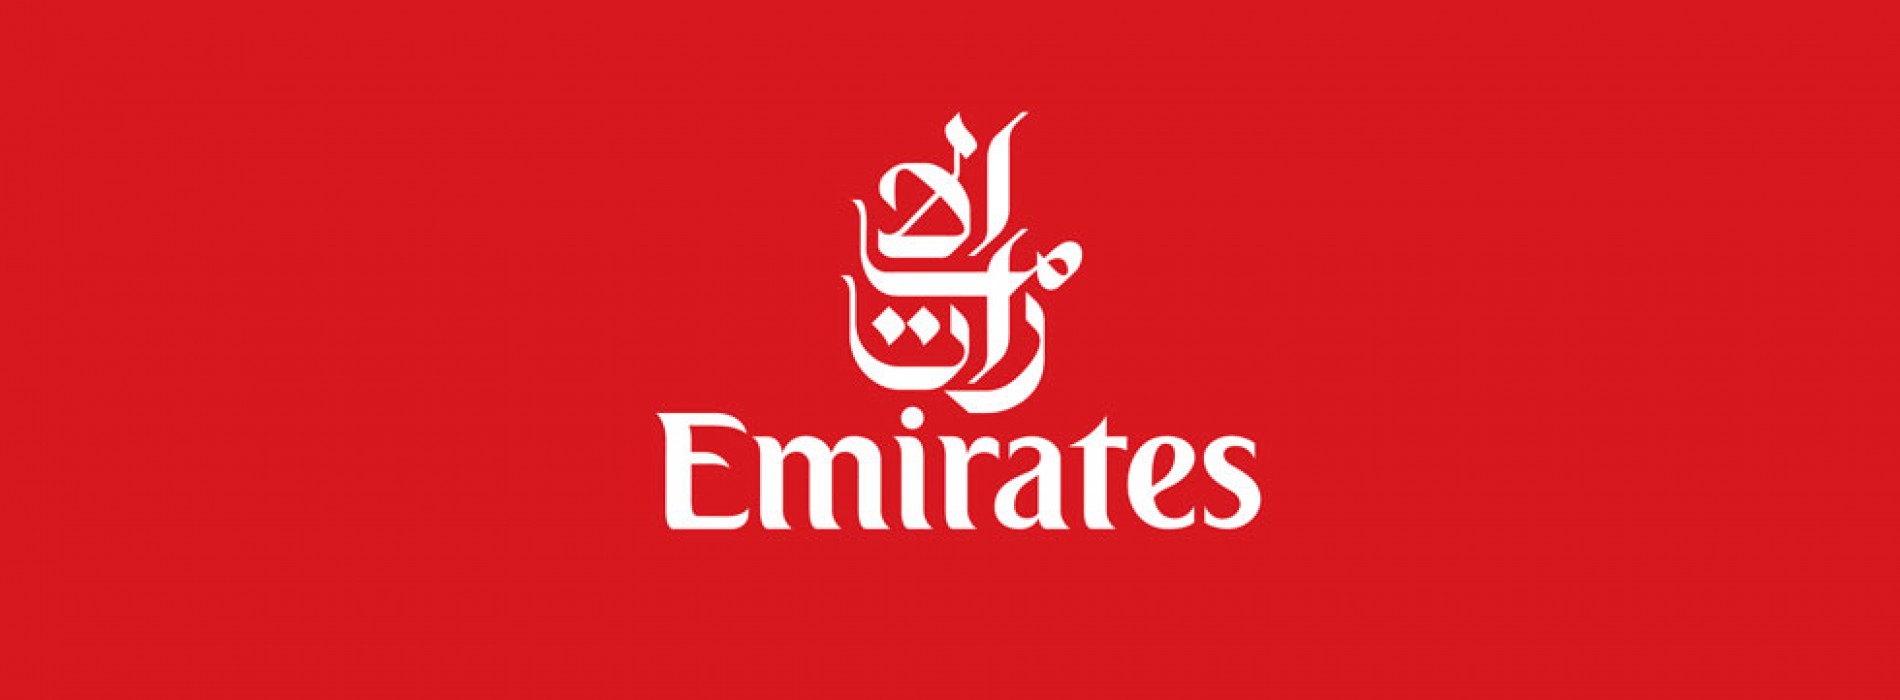 Emirates Announces Global Offers on Airfares to New Destinations in 2016